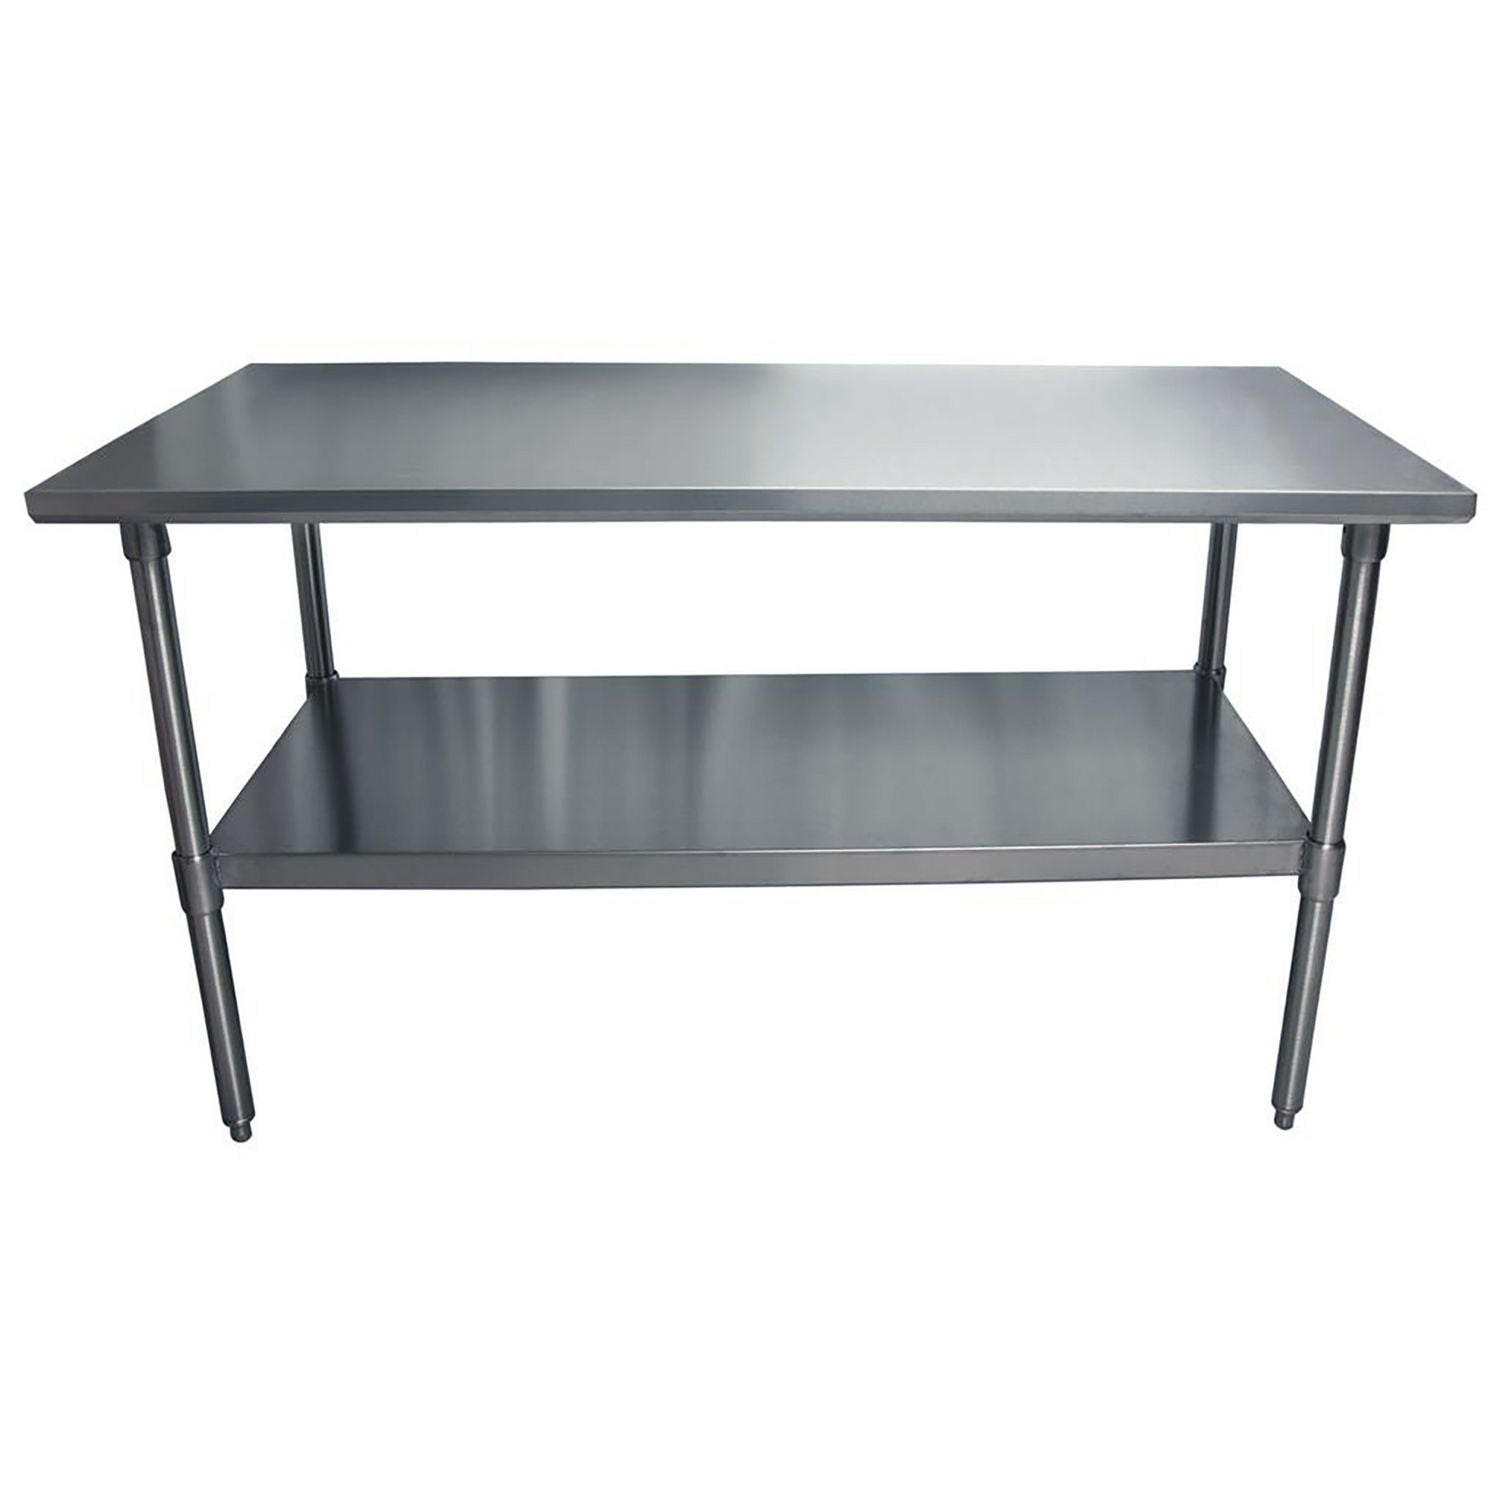 stainless-steel-flat-top-work-tables-60w-x-30d-x-36h-silver-2-pallet-ships-in-4-6-business-days_bke2vt6030 - 7